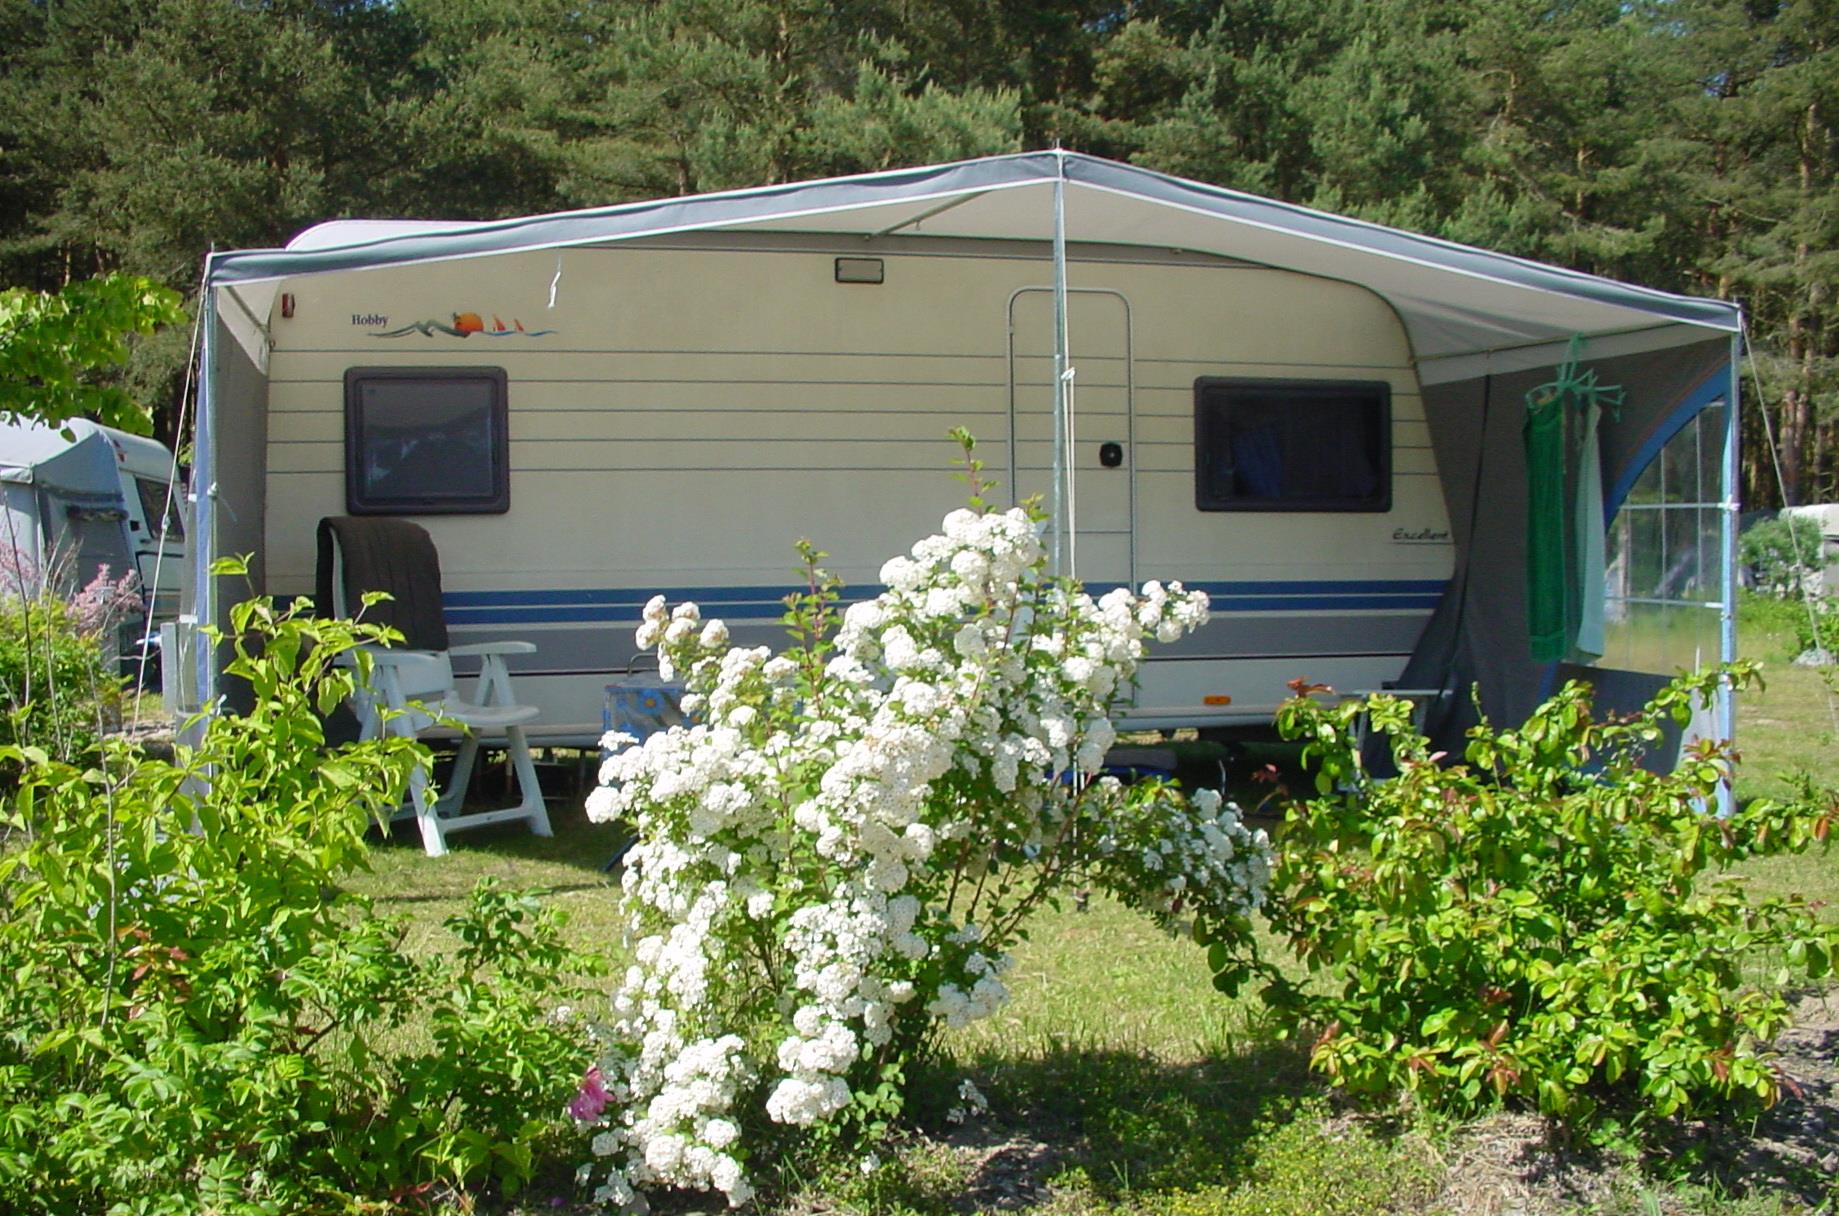 Pitch - Pitch Comfort - Natur Camping Usedom